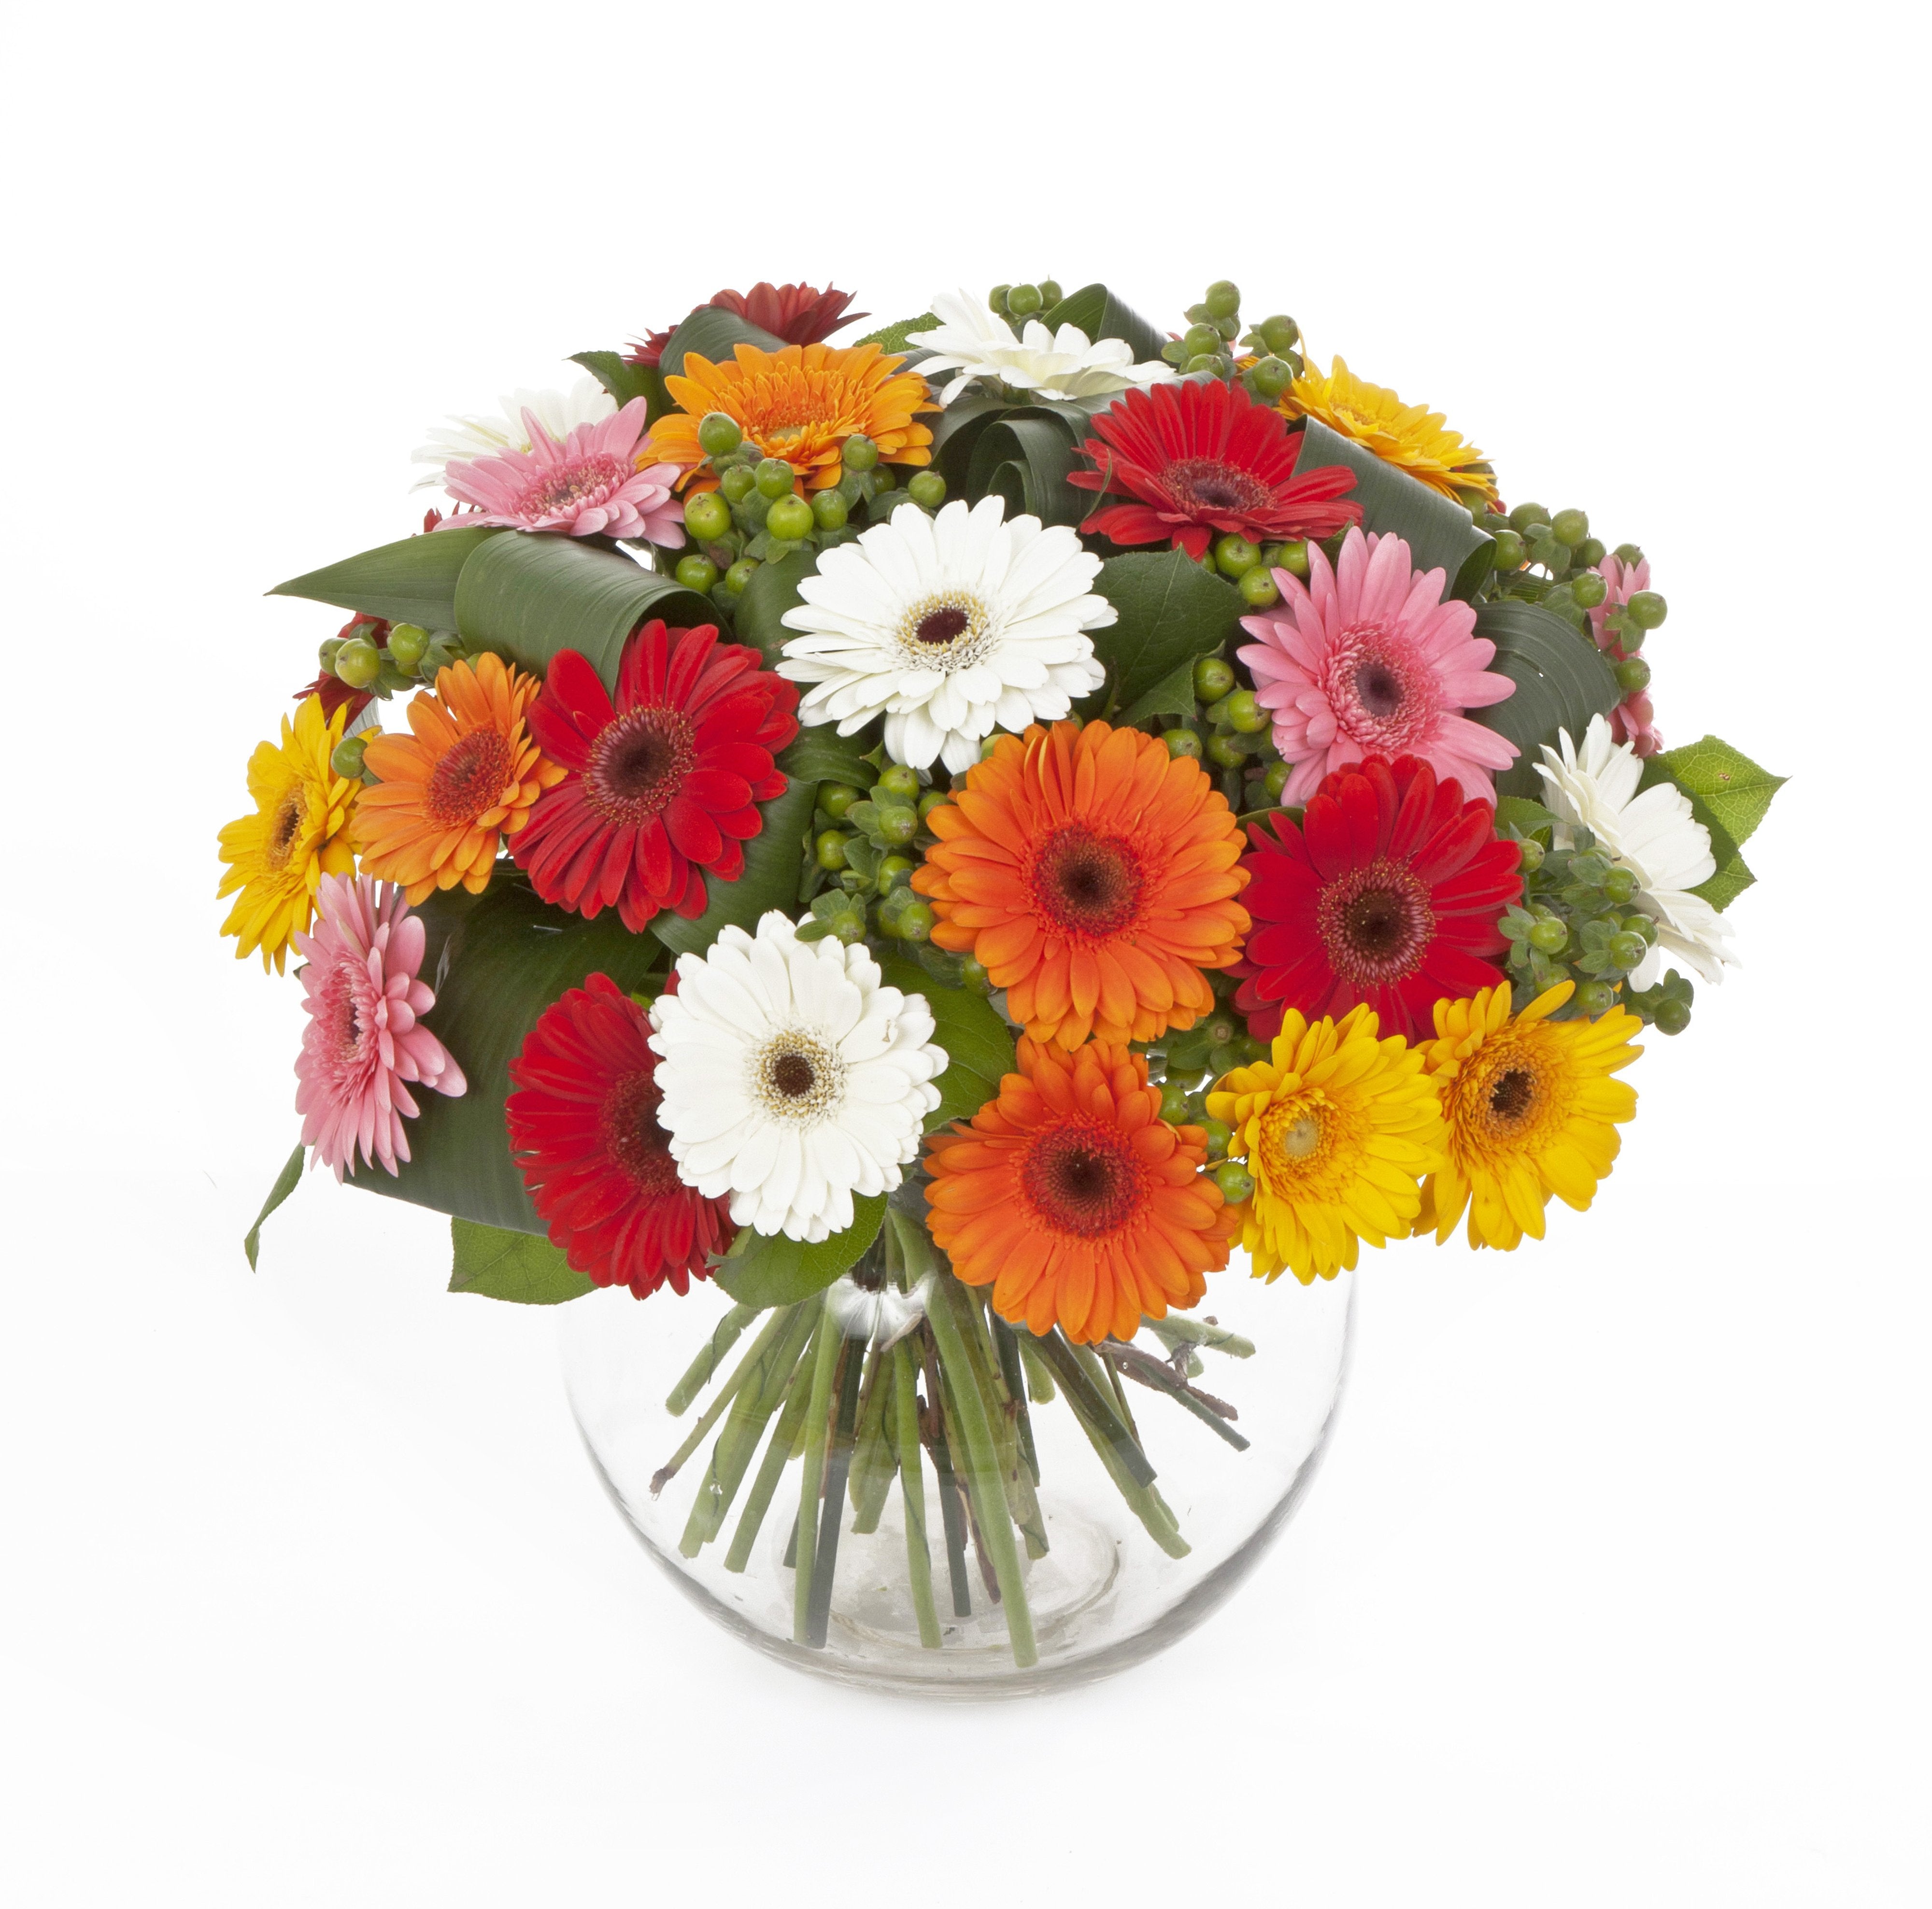 Get Well Soon Flower Bouquets with Same Day Flower Delivery Dublin or Next Day Flower Delivery Ireland